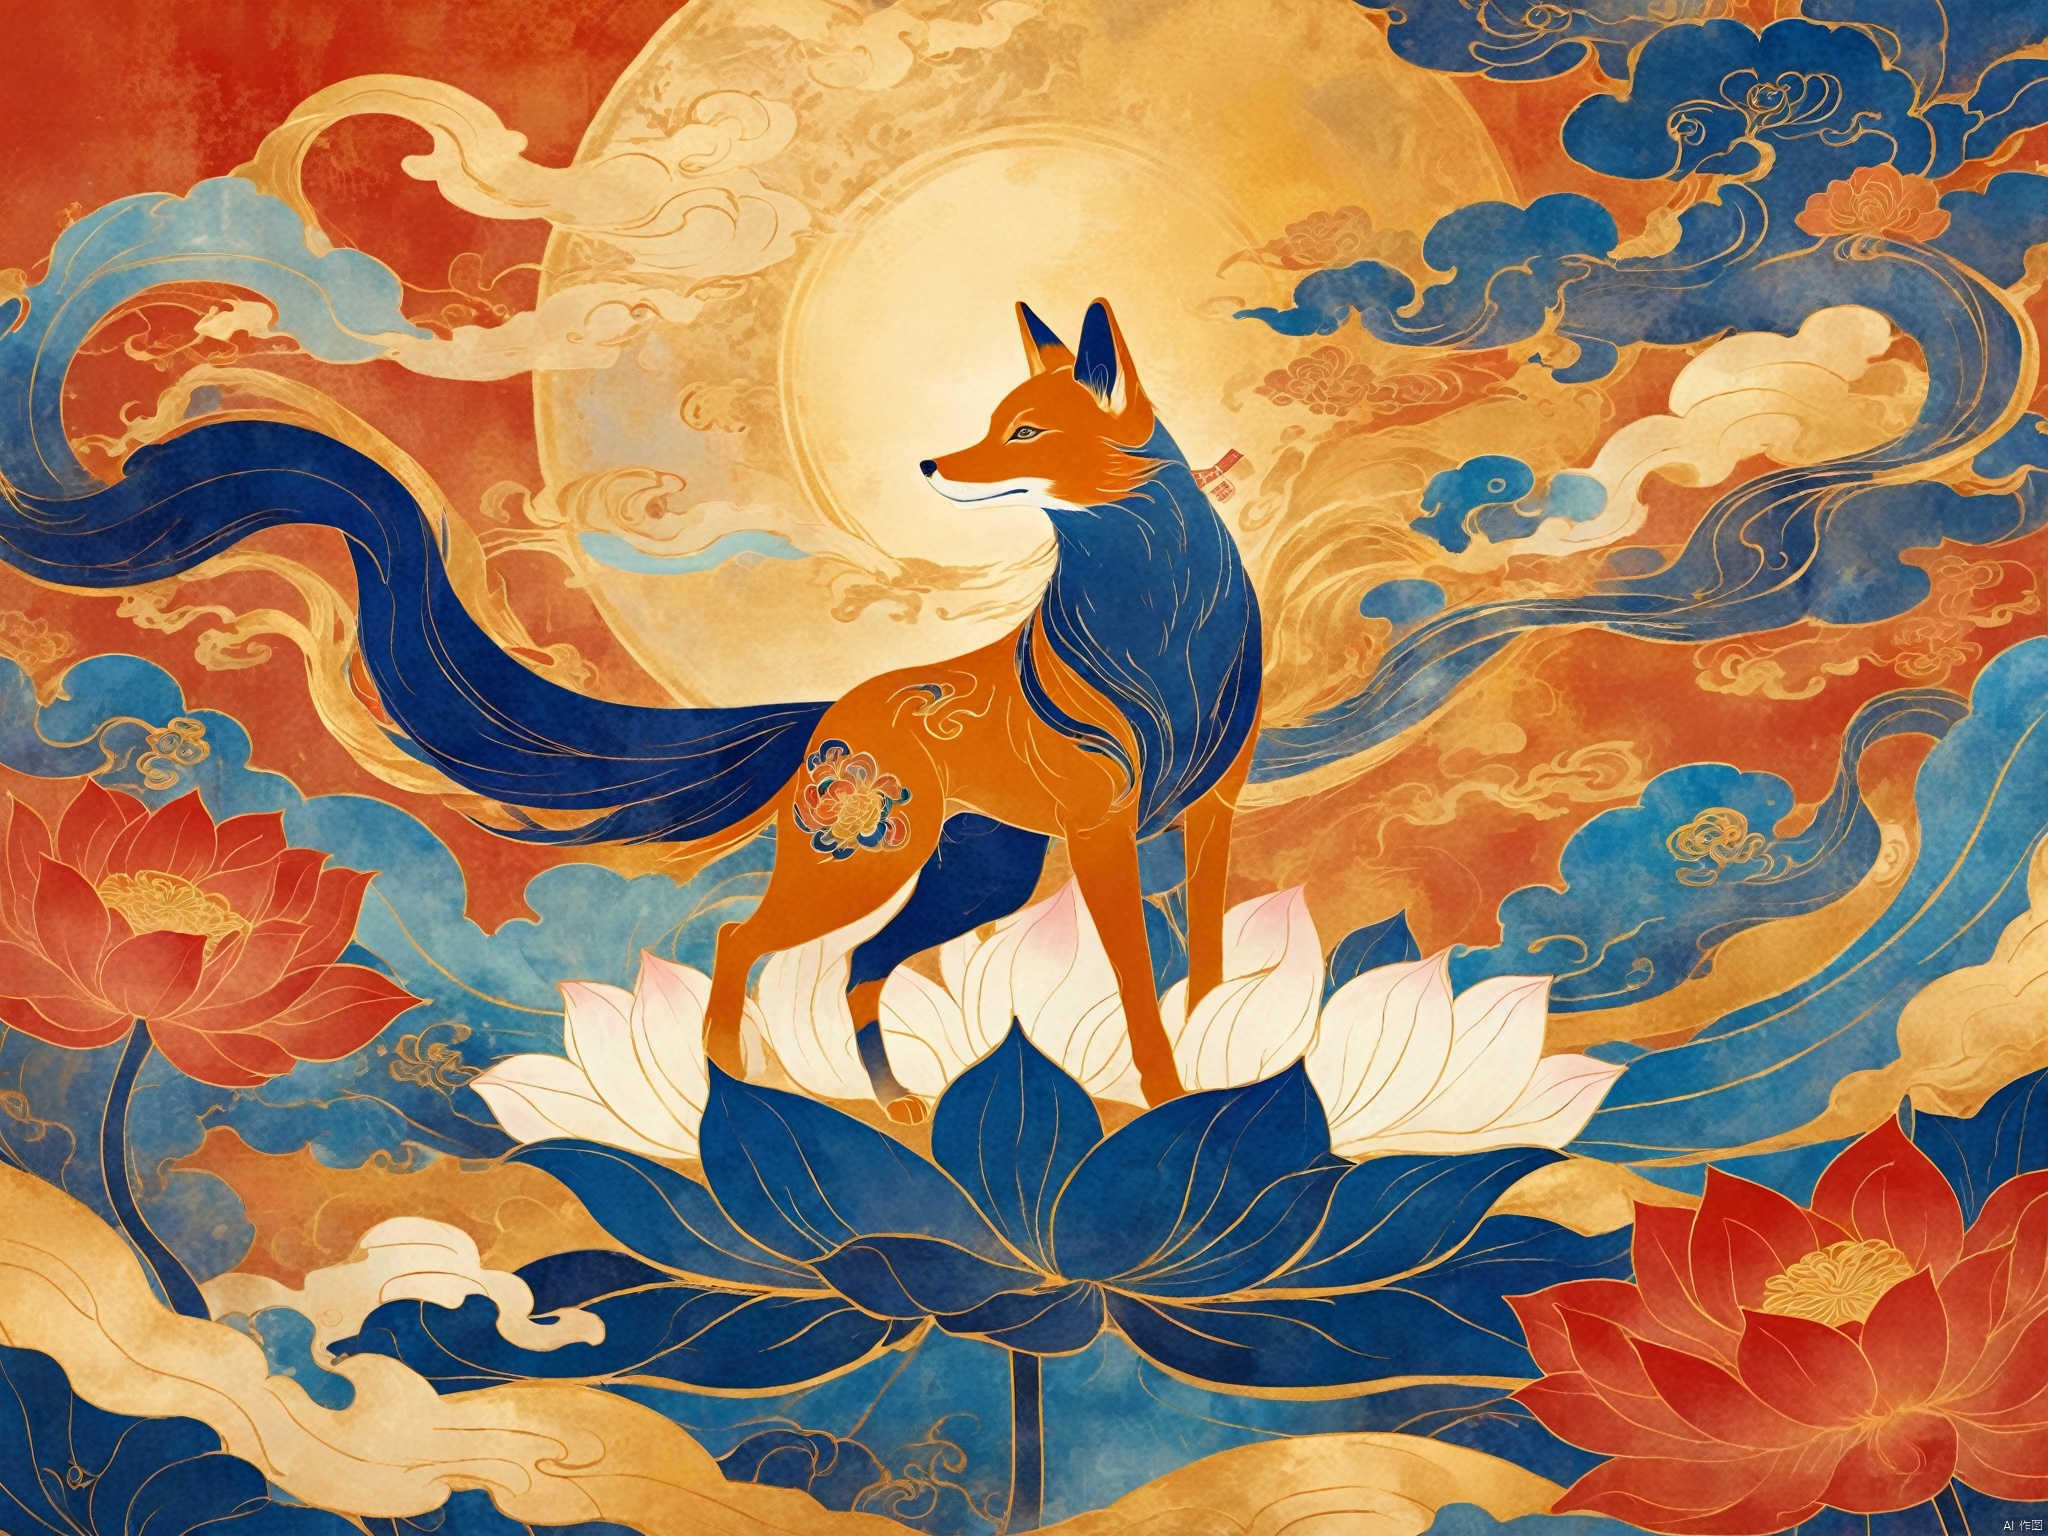  Dunhuang art style illustration,a magnificent Nine-tailed fox surrounded by auspicious clouds ,
Standing in the lotus pond ,extremely delicate brushstrokes, soft and smooth, China red and indigo, golden background